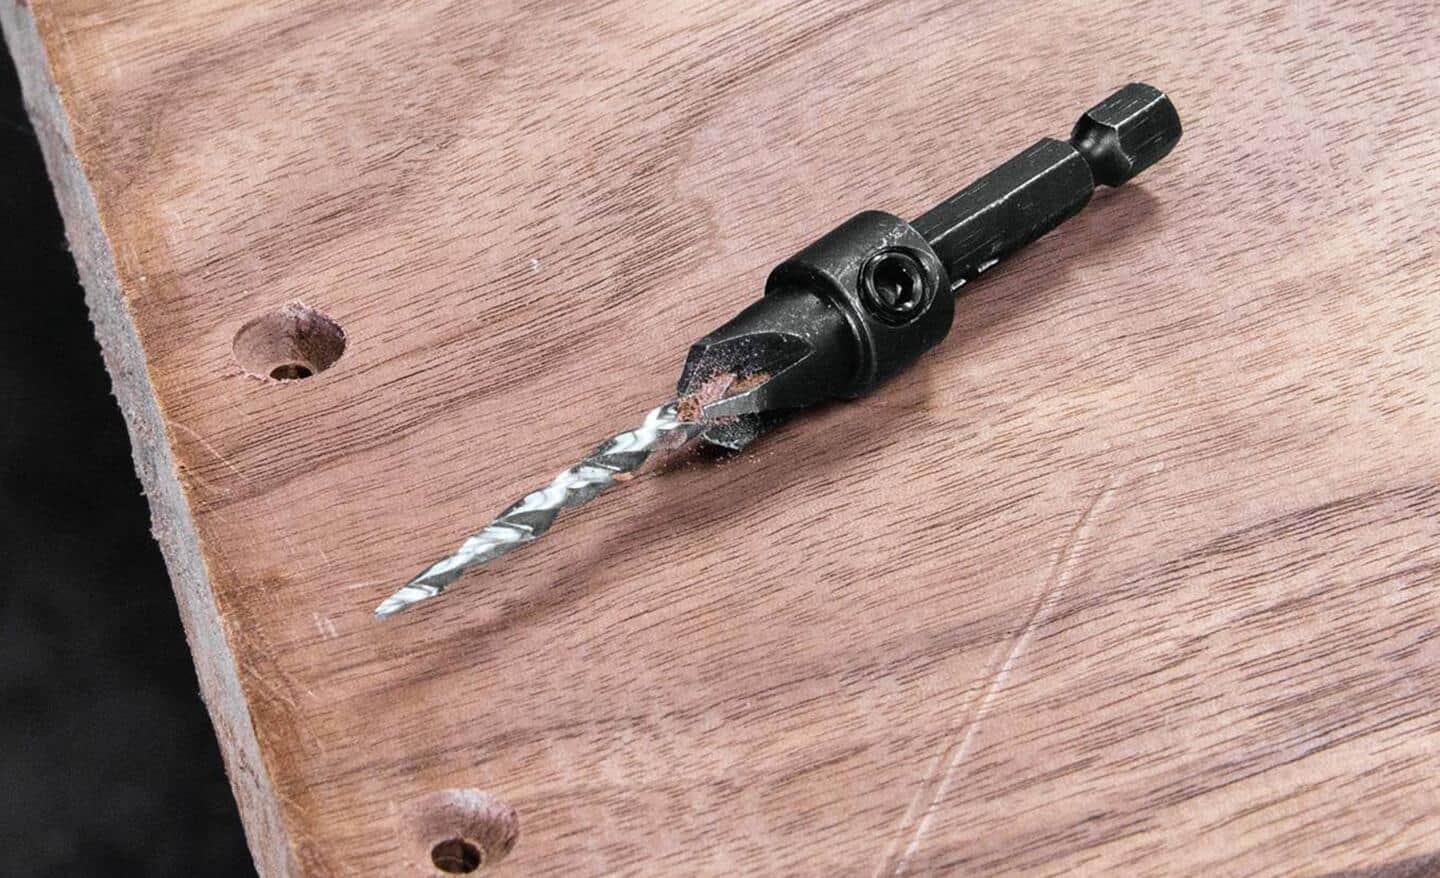 A countersink drill bit on a piece of wood.